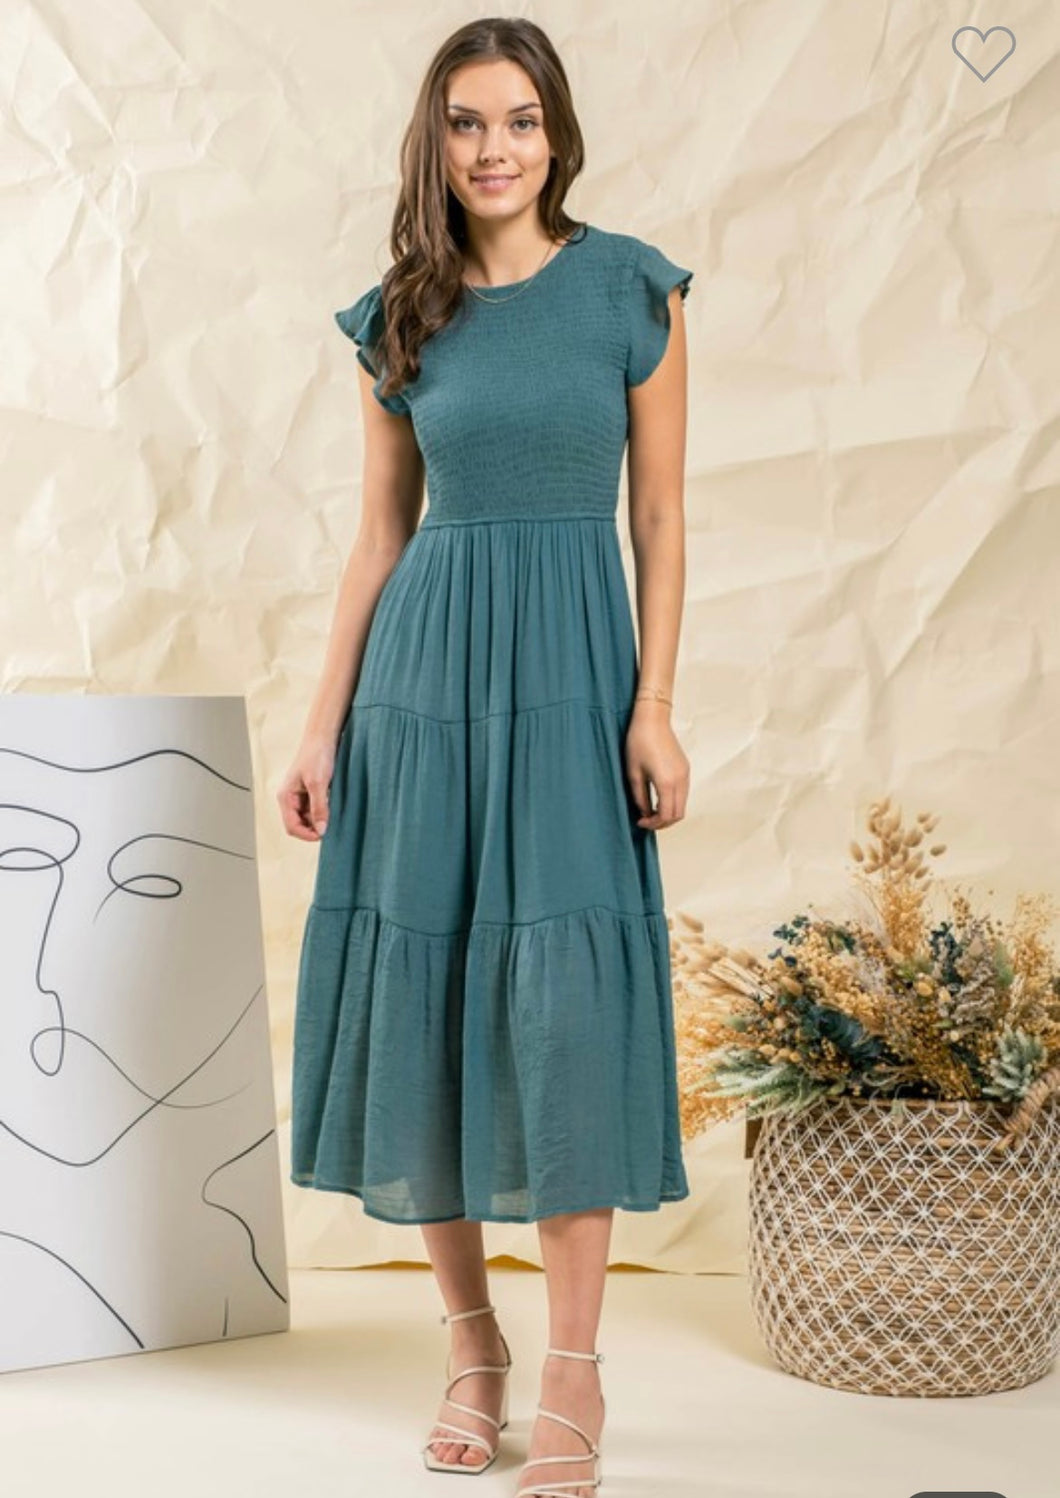 Tiered dress in teal